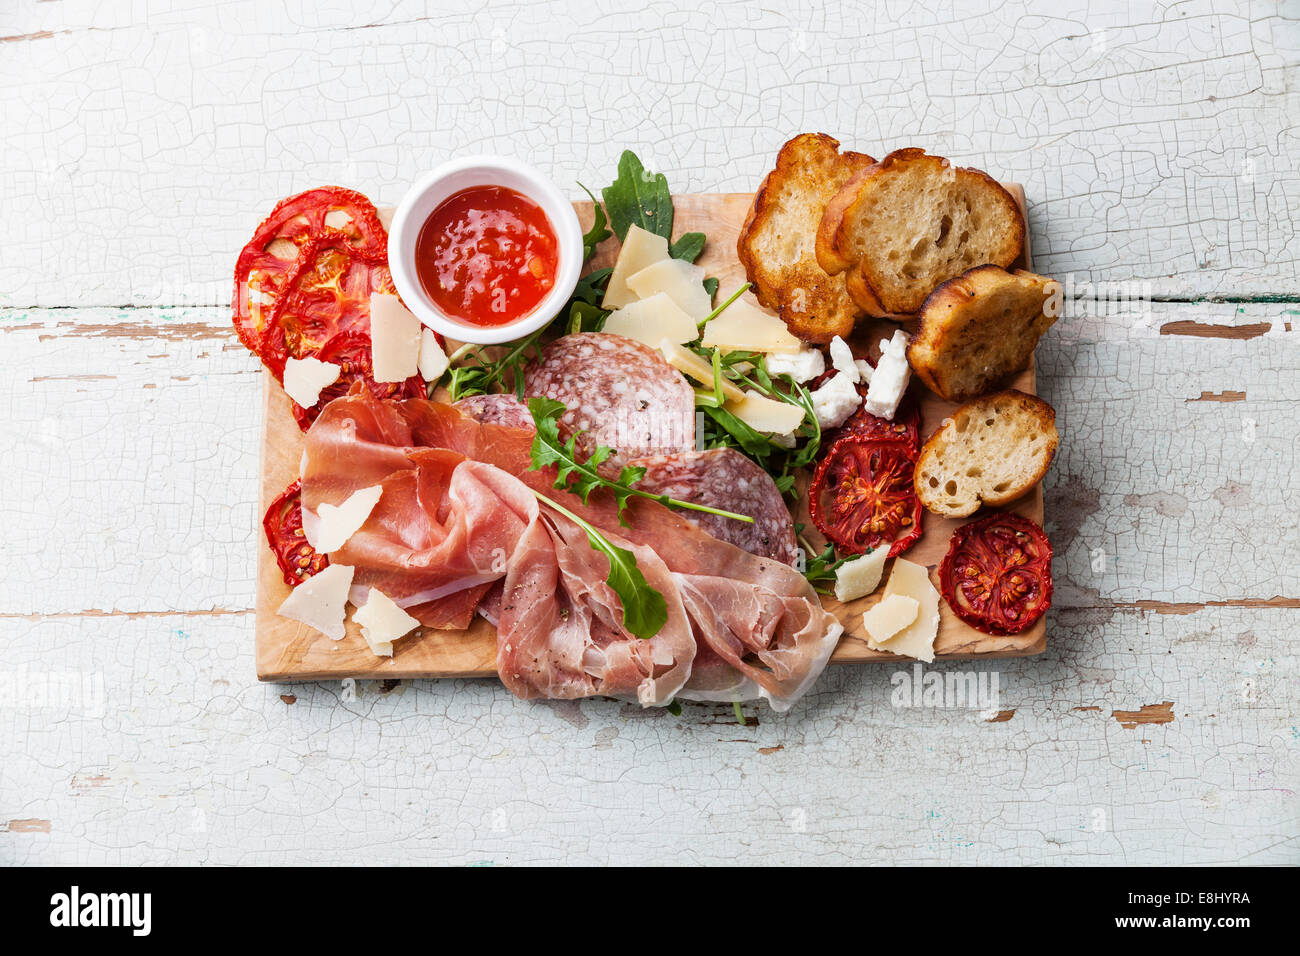 Cold meat plate and bread on wooden background Stock Photo